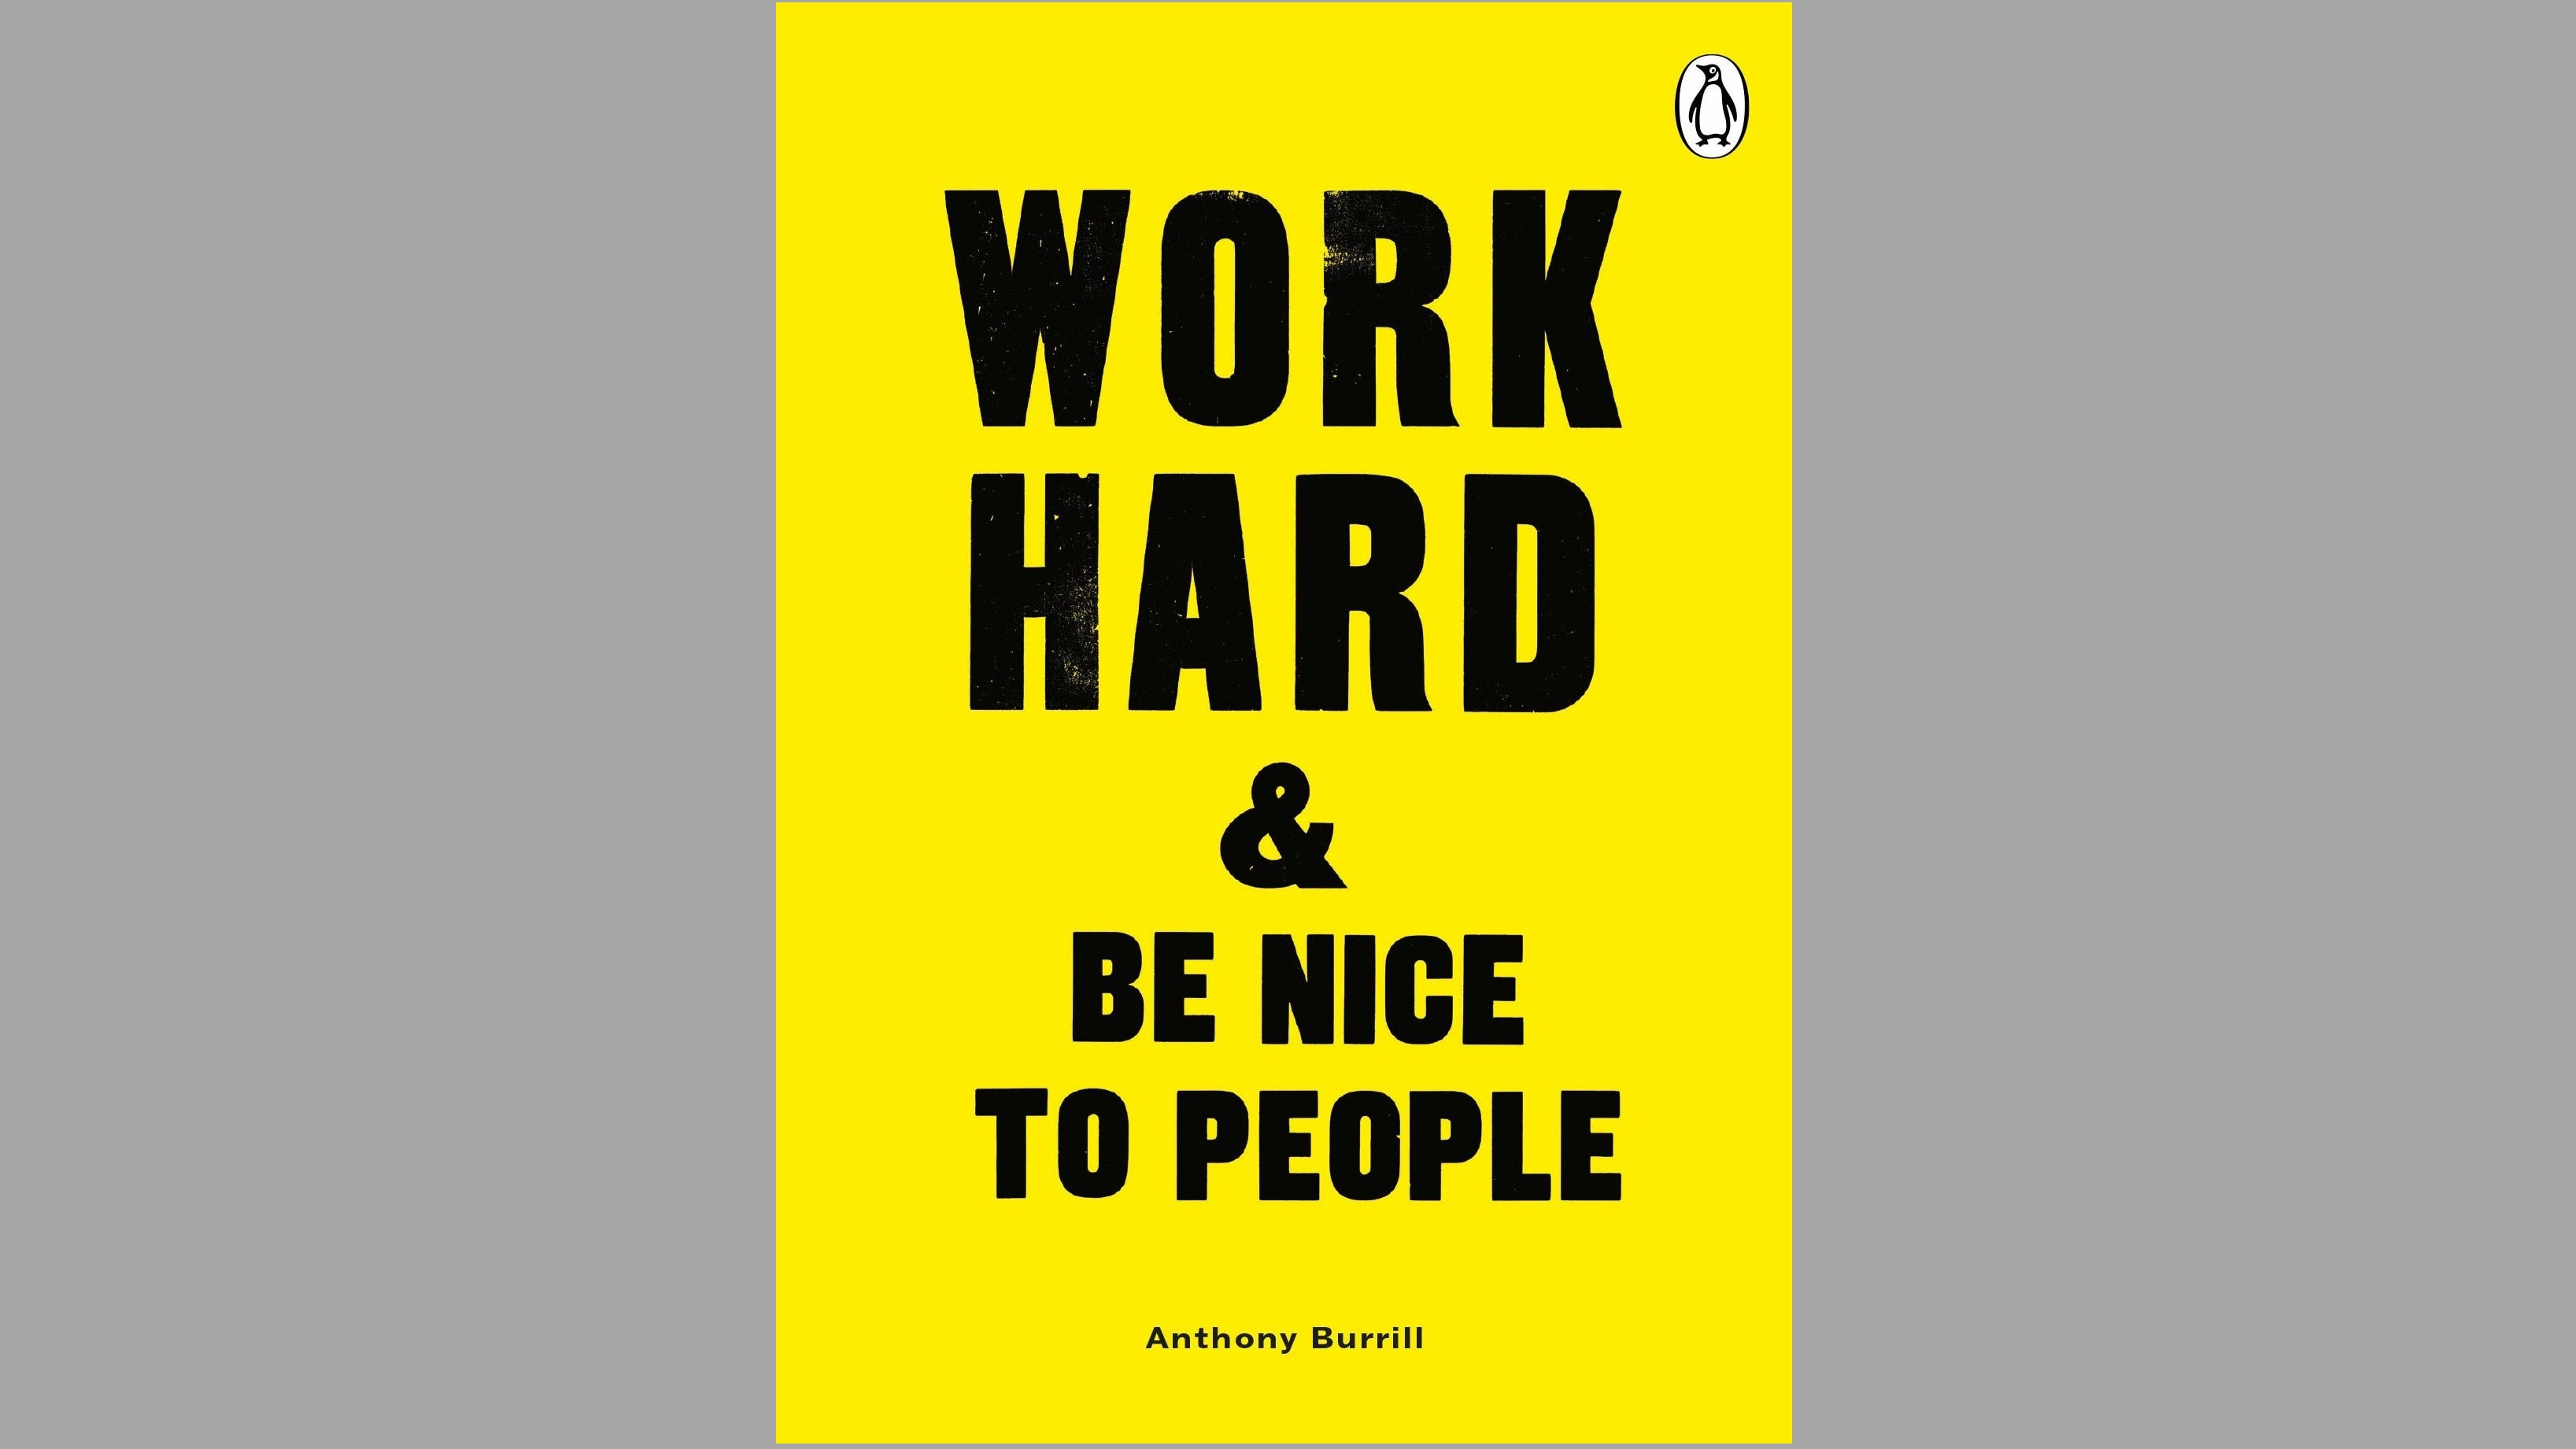 Cover shot of one of the best graphic design books, Work Hard & Be Nice to People